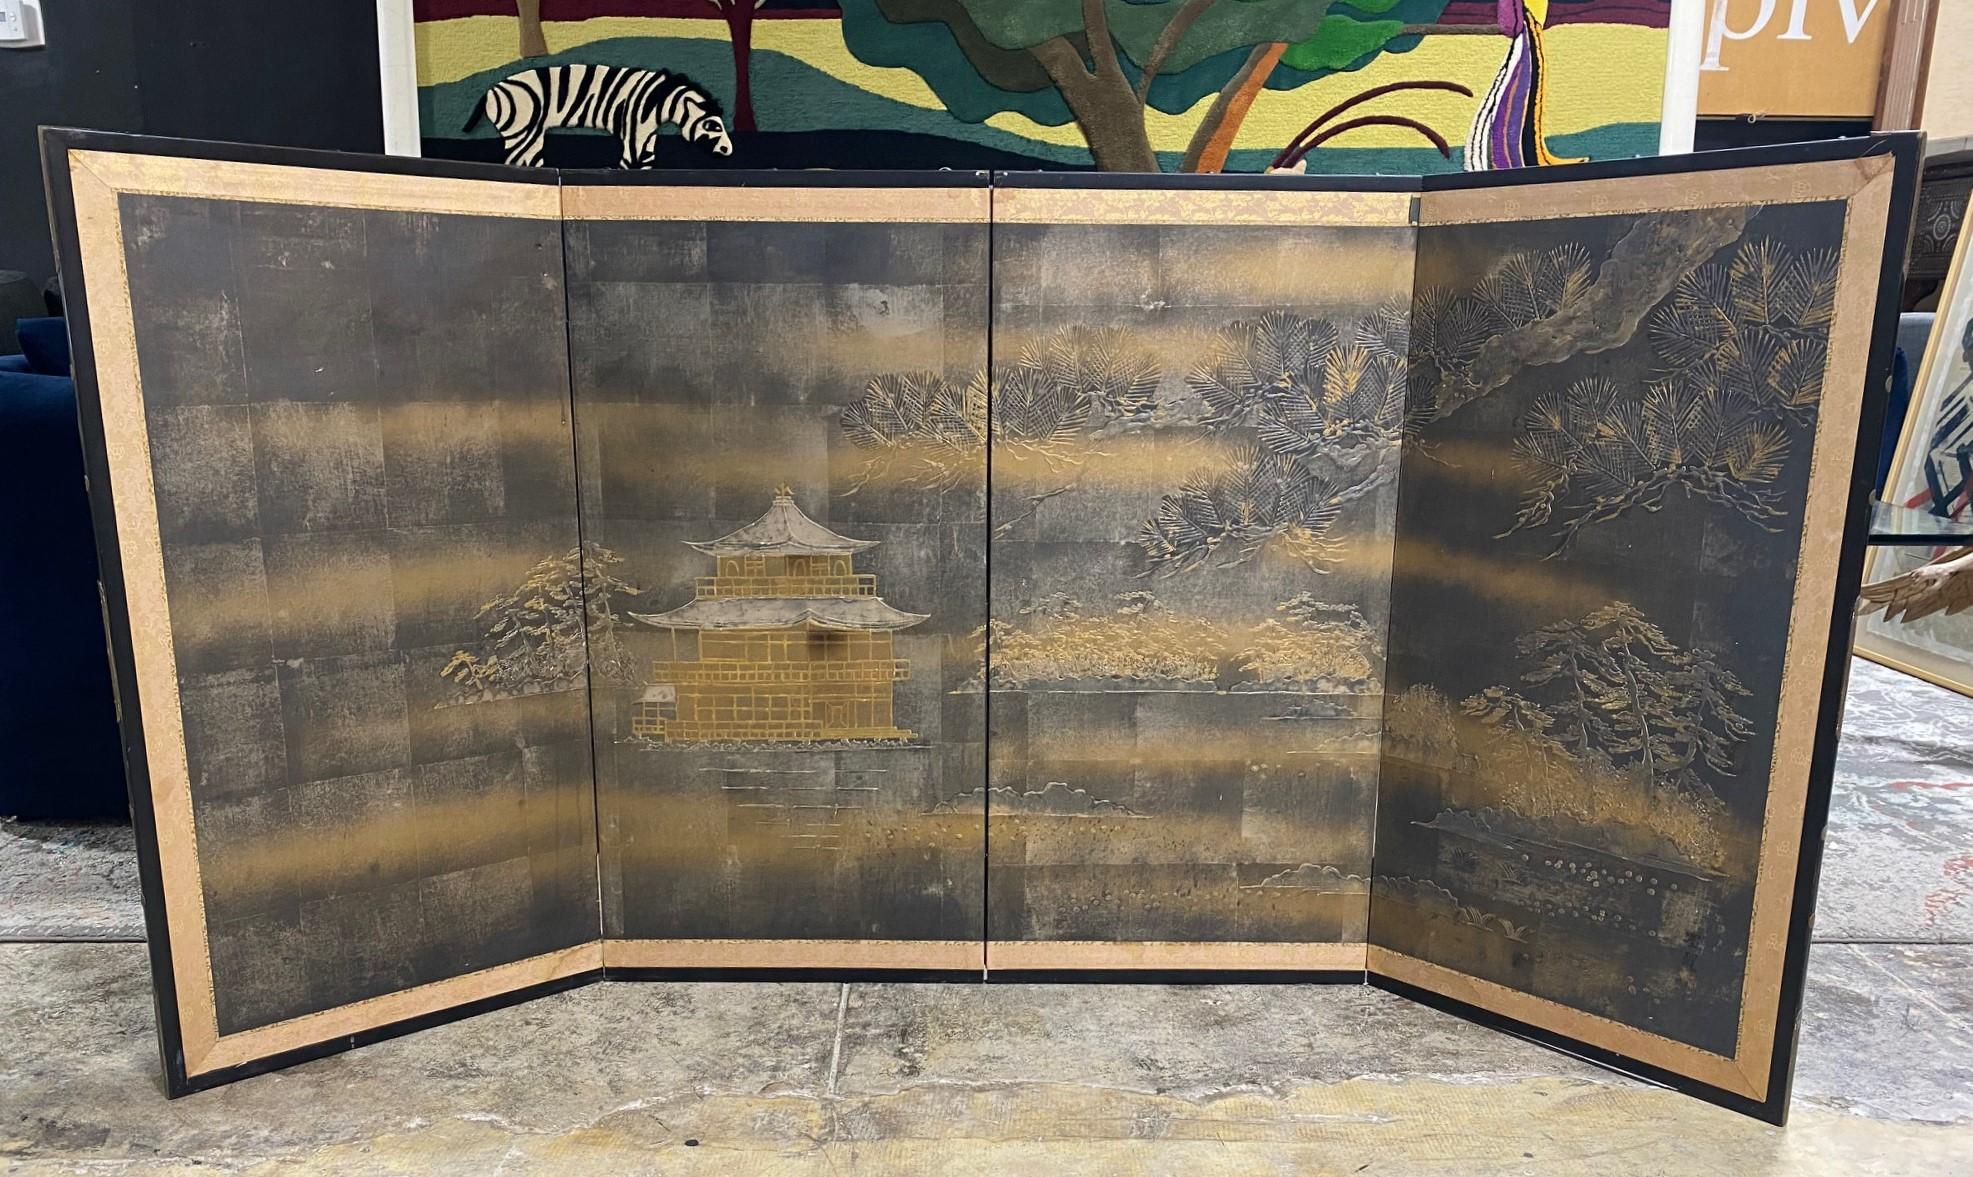 A gorgeous four-panel Japanese/Asian Byobu folding screen depicting a nature landscape scene featuring a lakeside temple/pagoda and forest trees (with a fantastic composition of a pine tree branch entering the frame in the foreground from the far